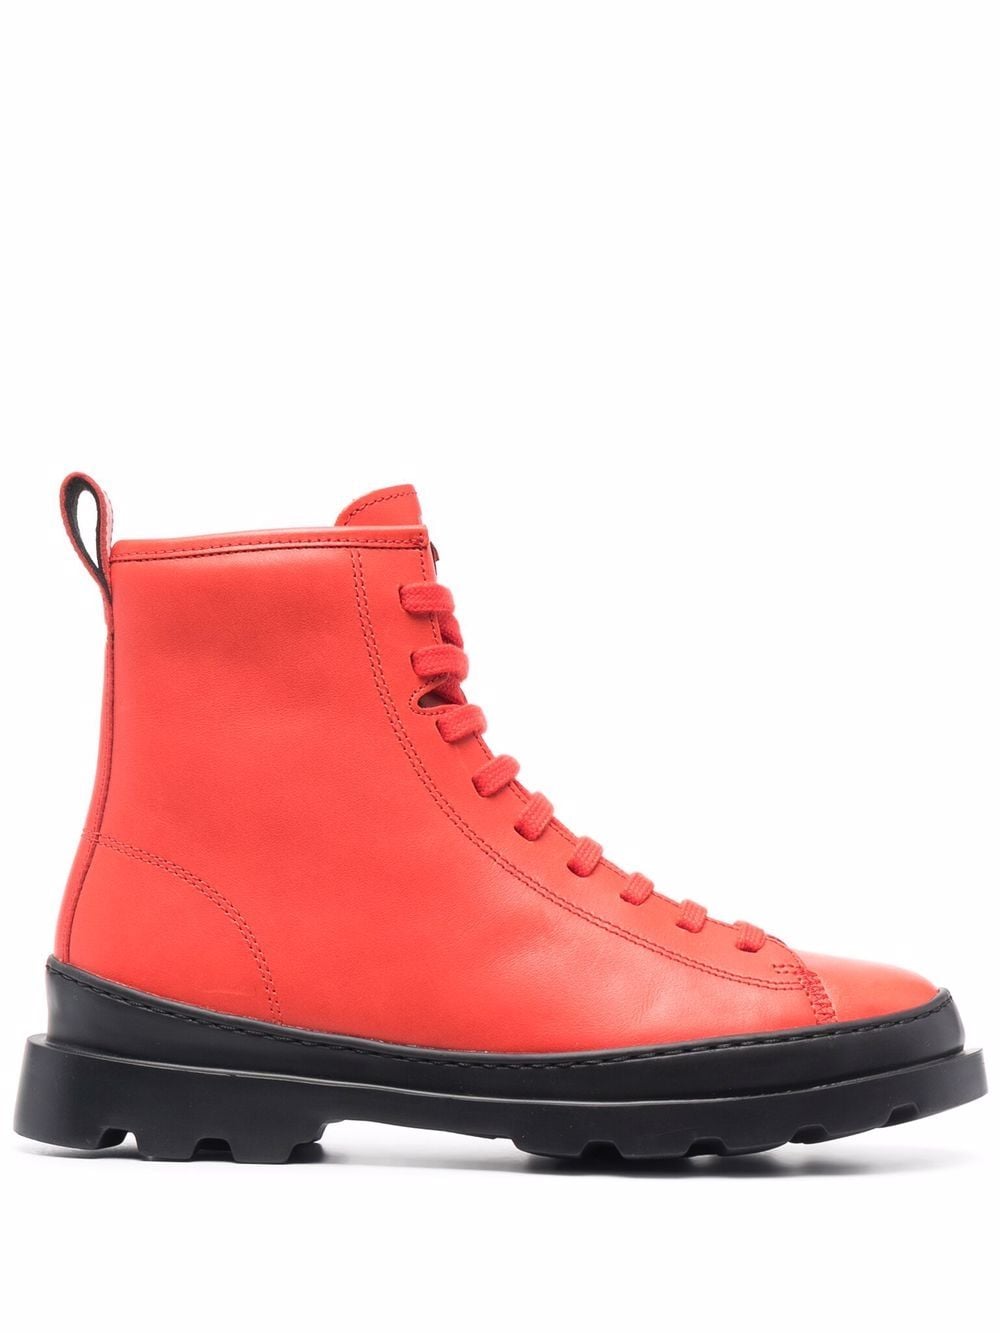 Camper Brutus lace-up Boots - Farfetch